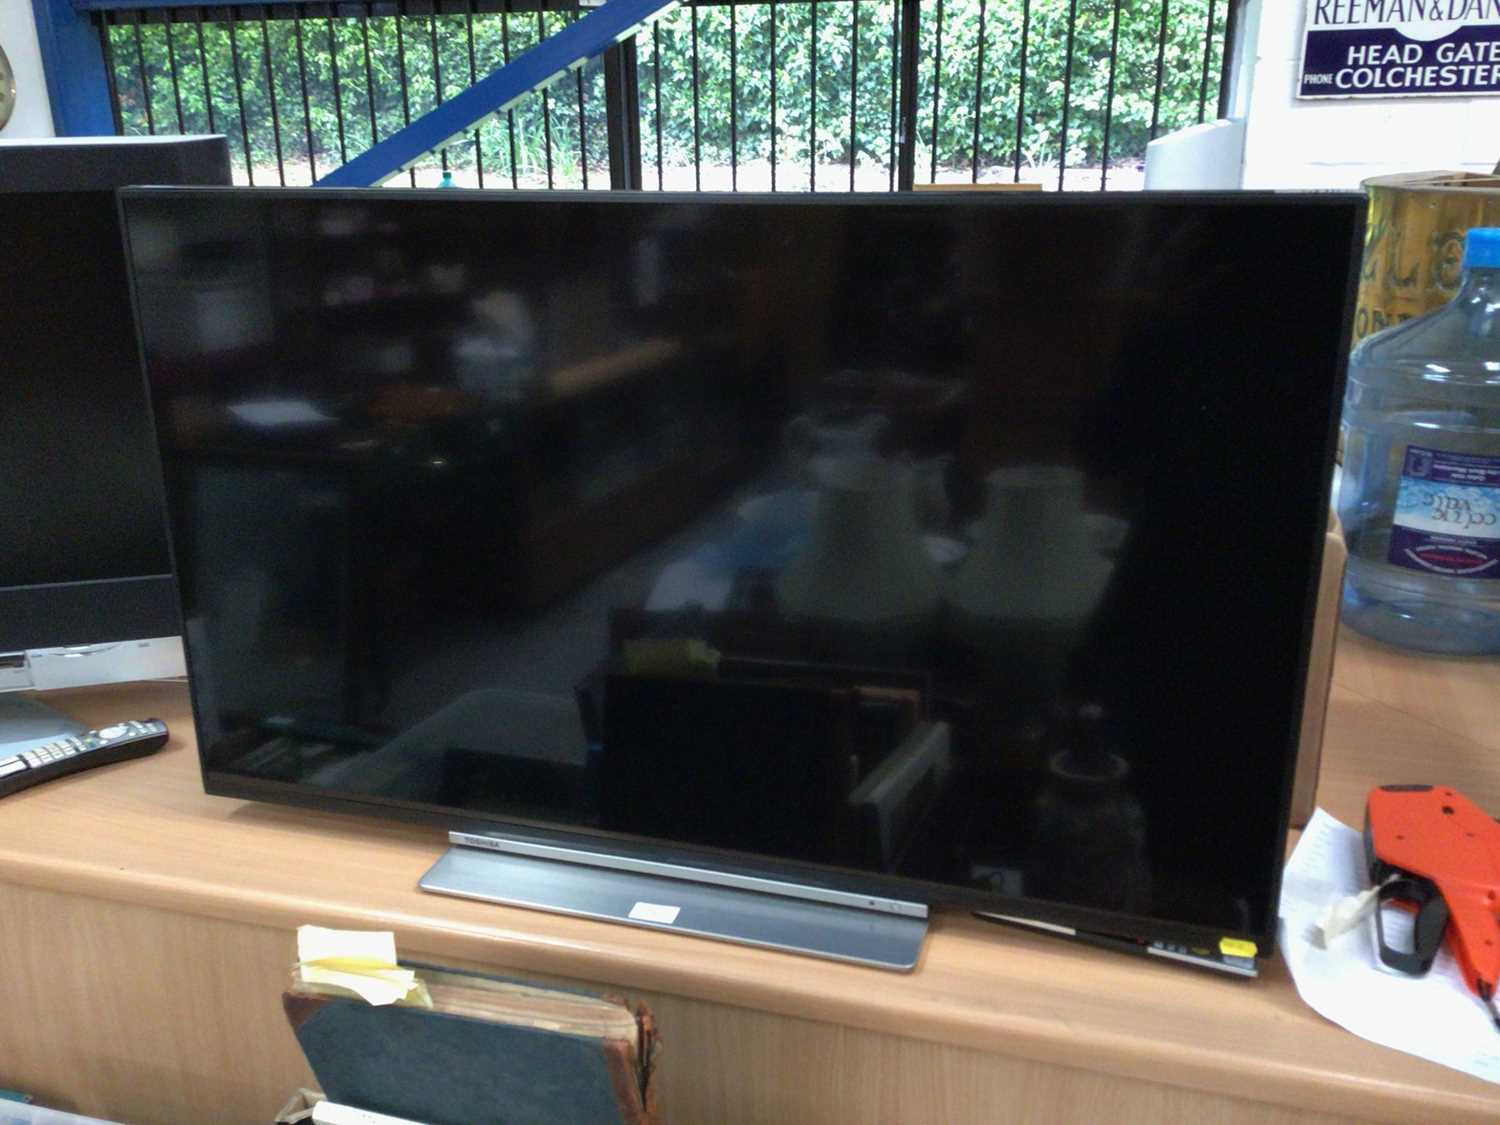 Lot 3 - Toshiba flatscreen television model number 43UL5A63DB with remote control